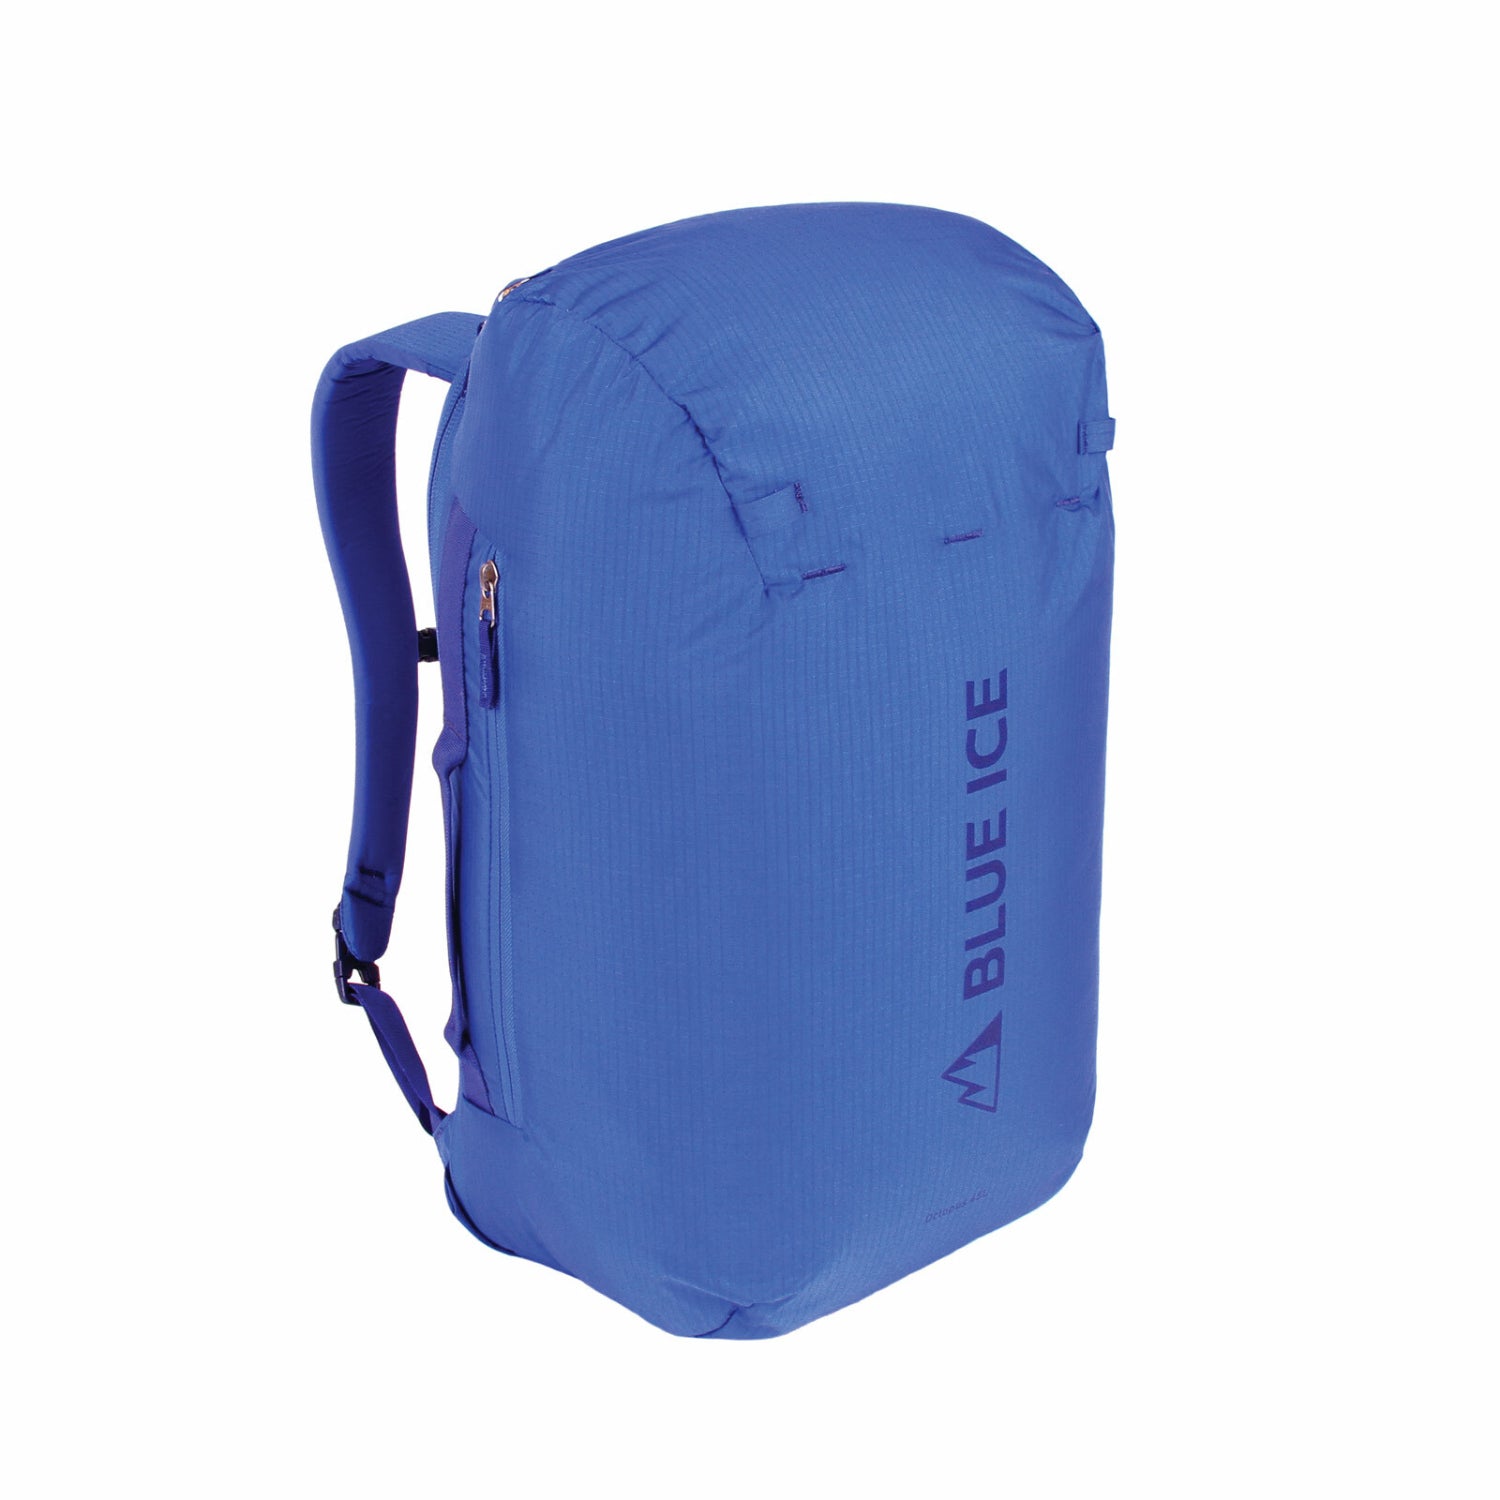 Blue Ice Octopus Climbing Pack 45L